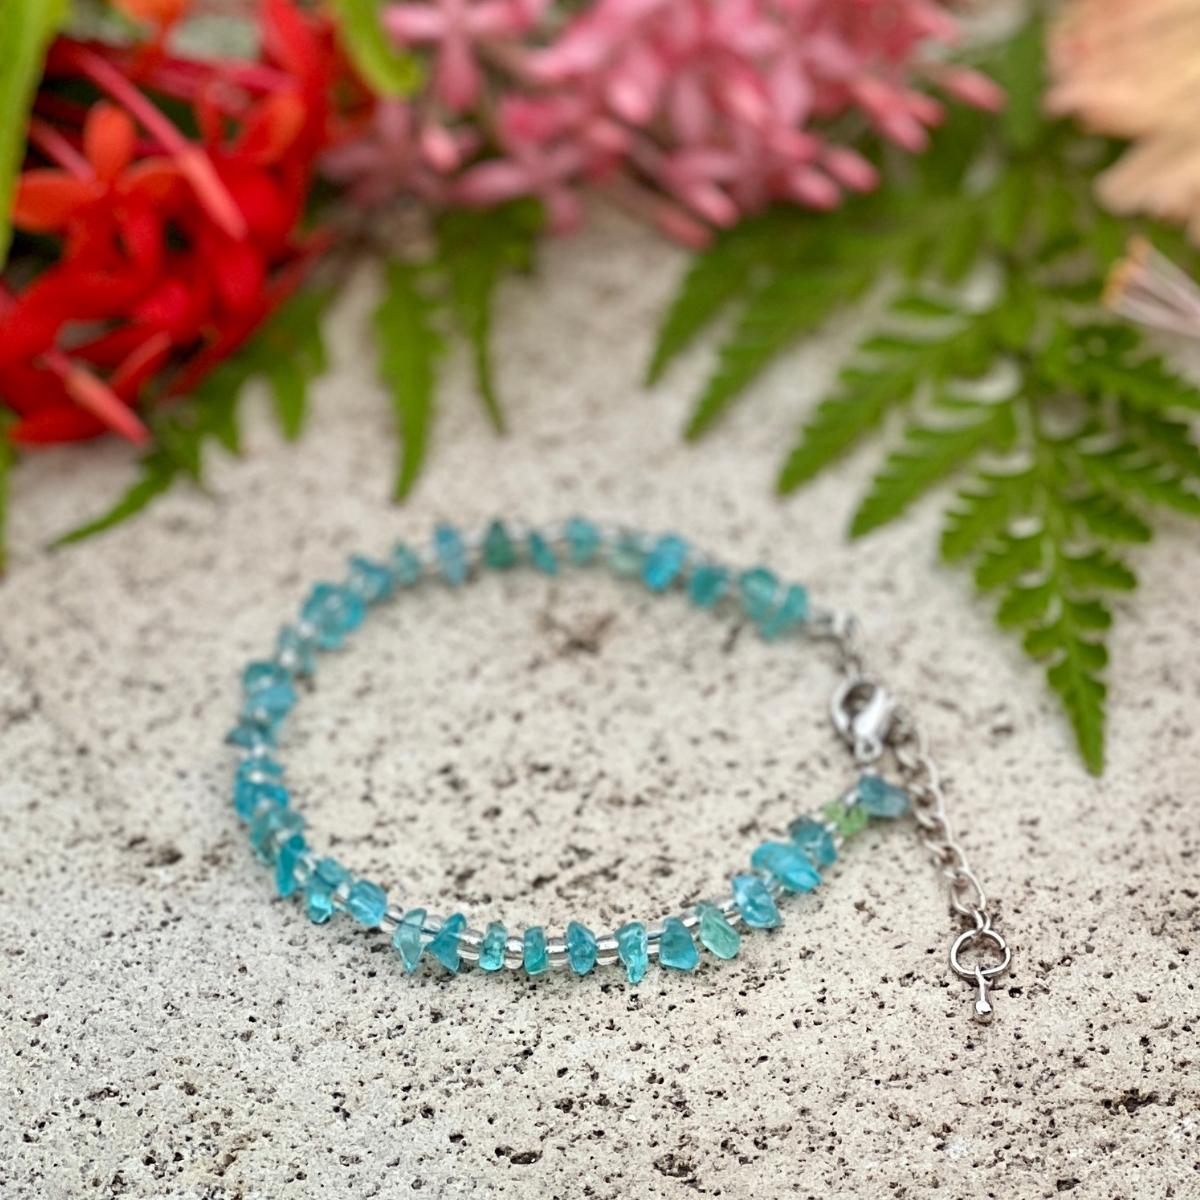 Apatite Bracelet for Healthy Habits - Best Healing Crystal Bracelet for Eating Disorders. Are you looking for crystals to help with eating disorders? The best crystals for anorexia, the best crystal for bulimia or the best crystal for eating disorders in general? APATITE is it.